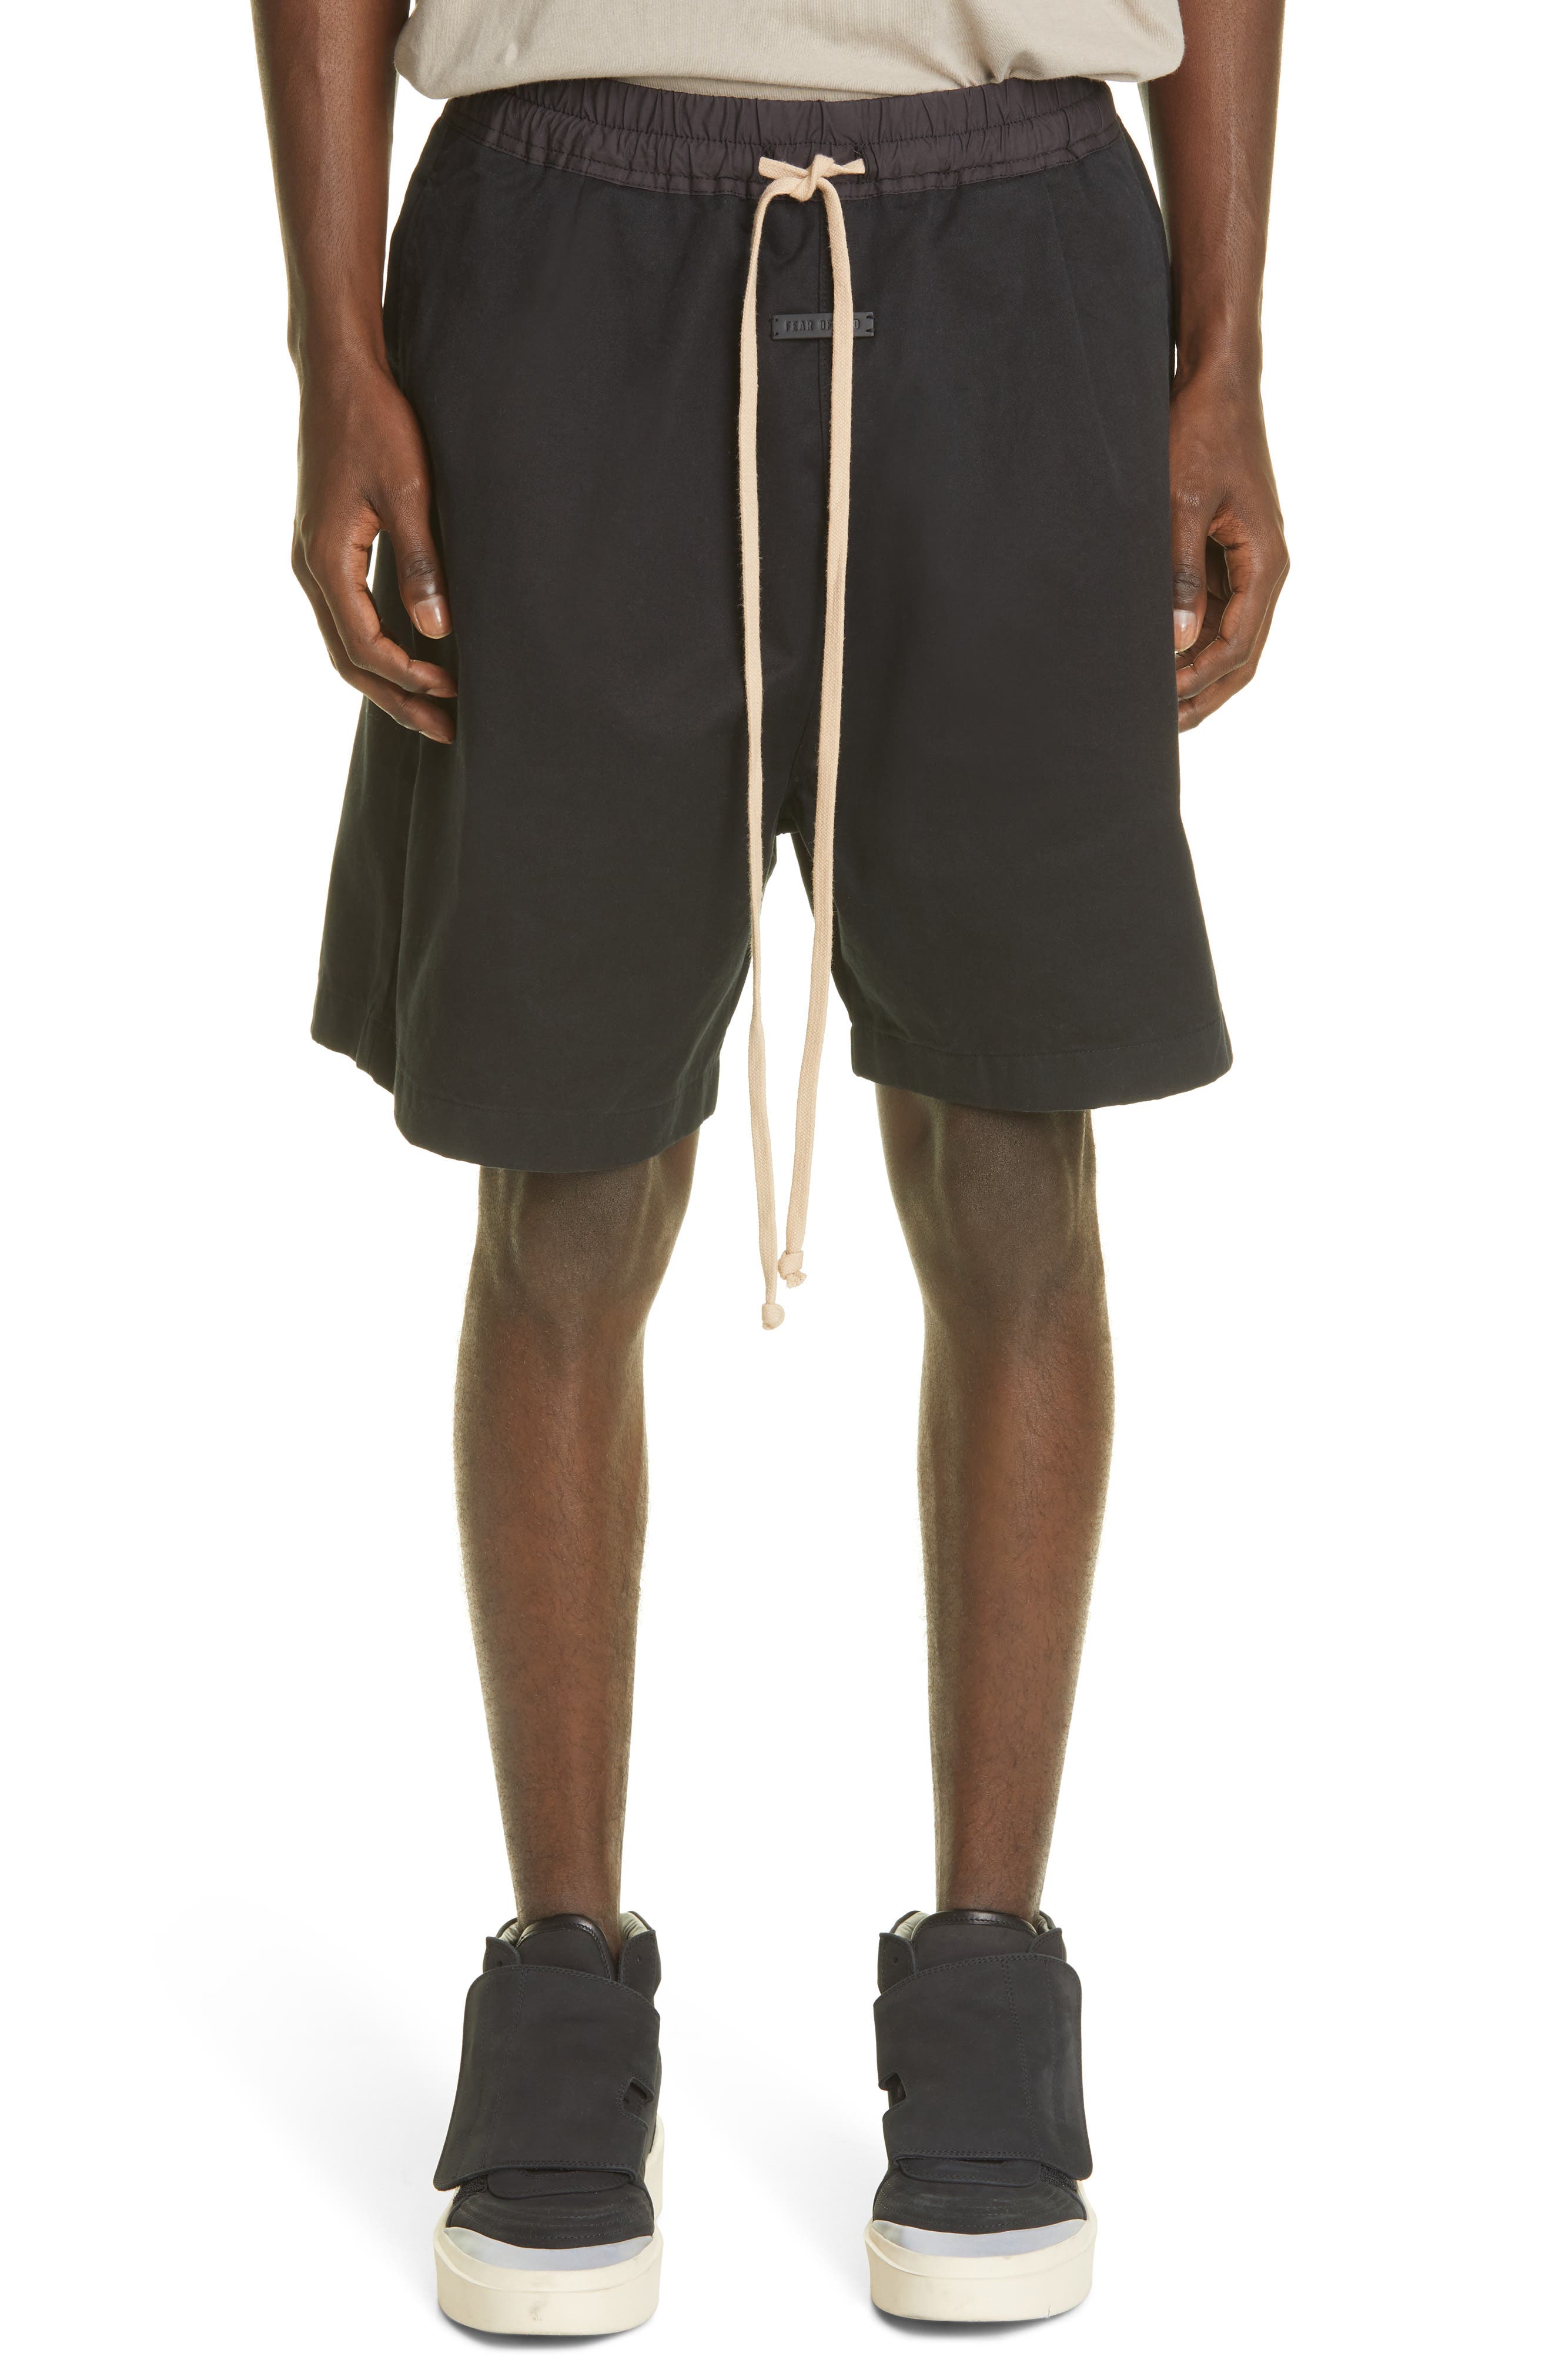 Fear of God Trouser Shorts in Black at Nordstrom, Size X-Large